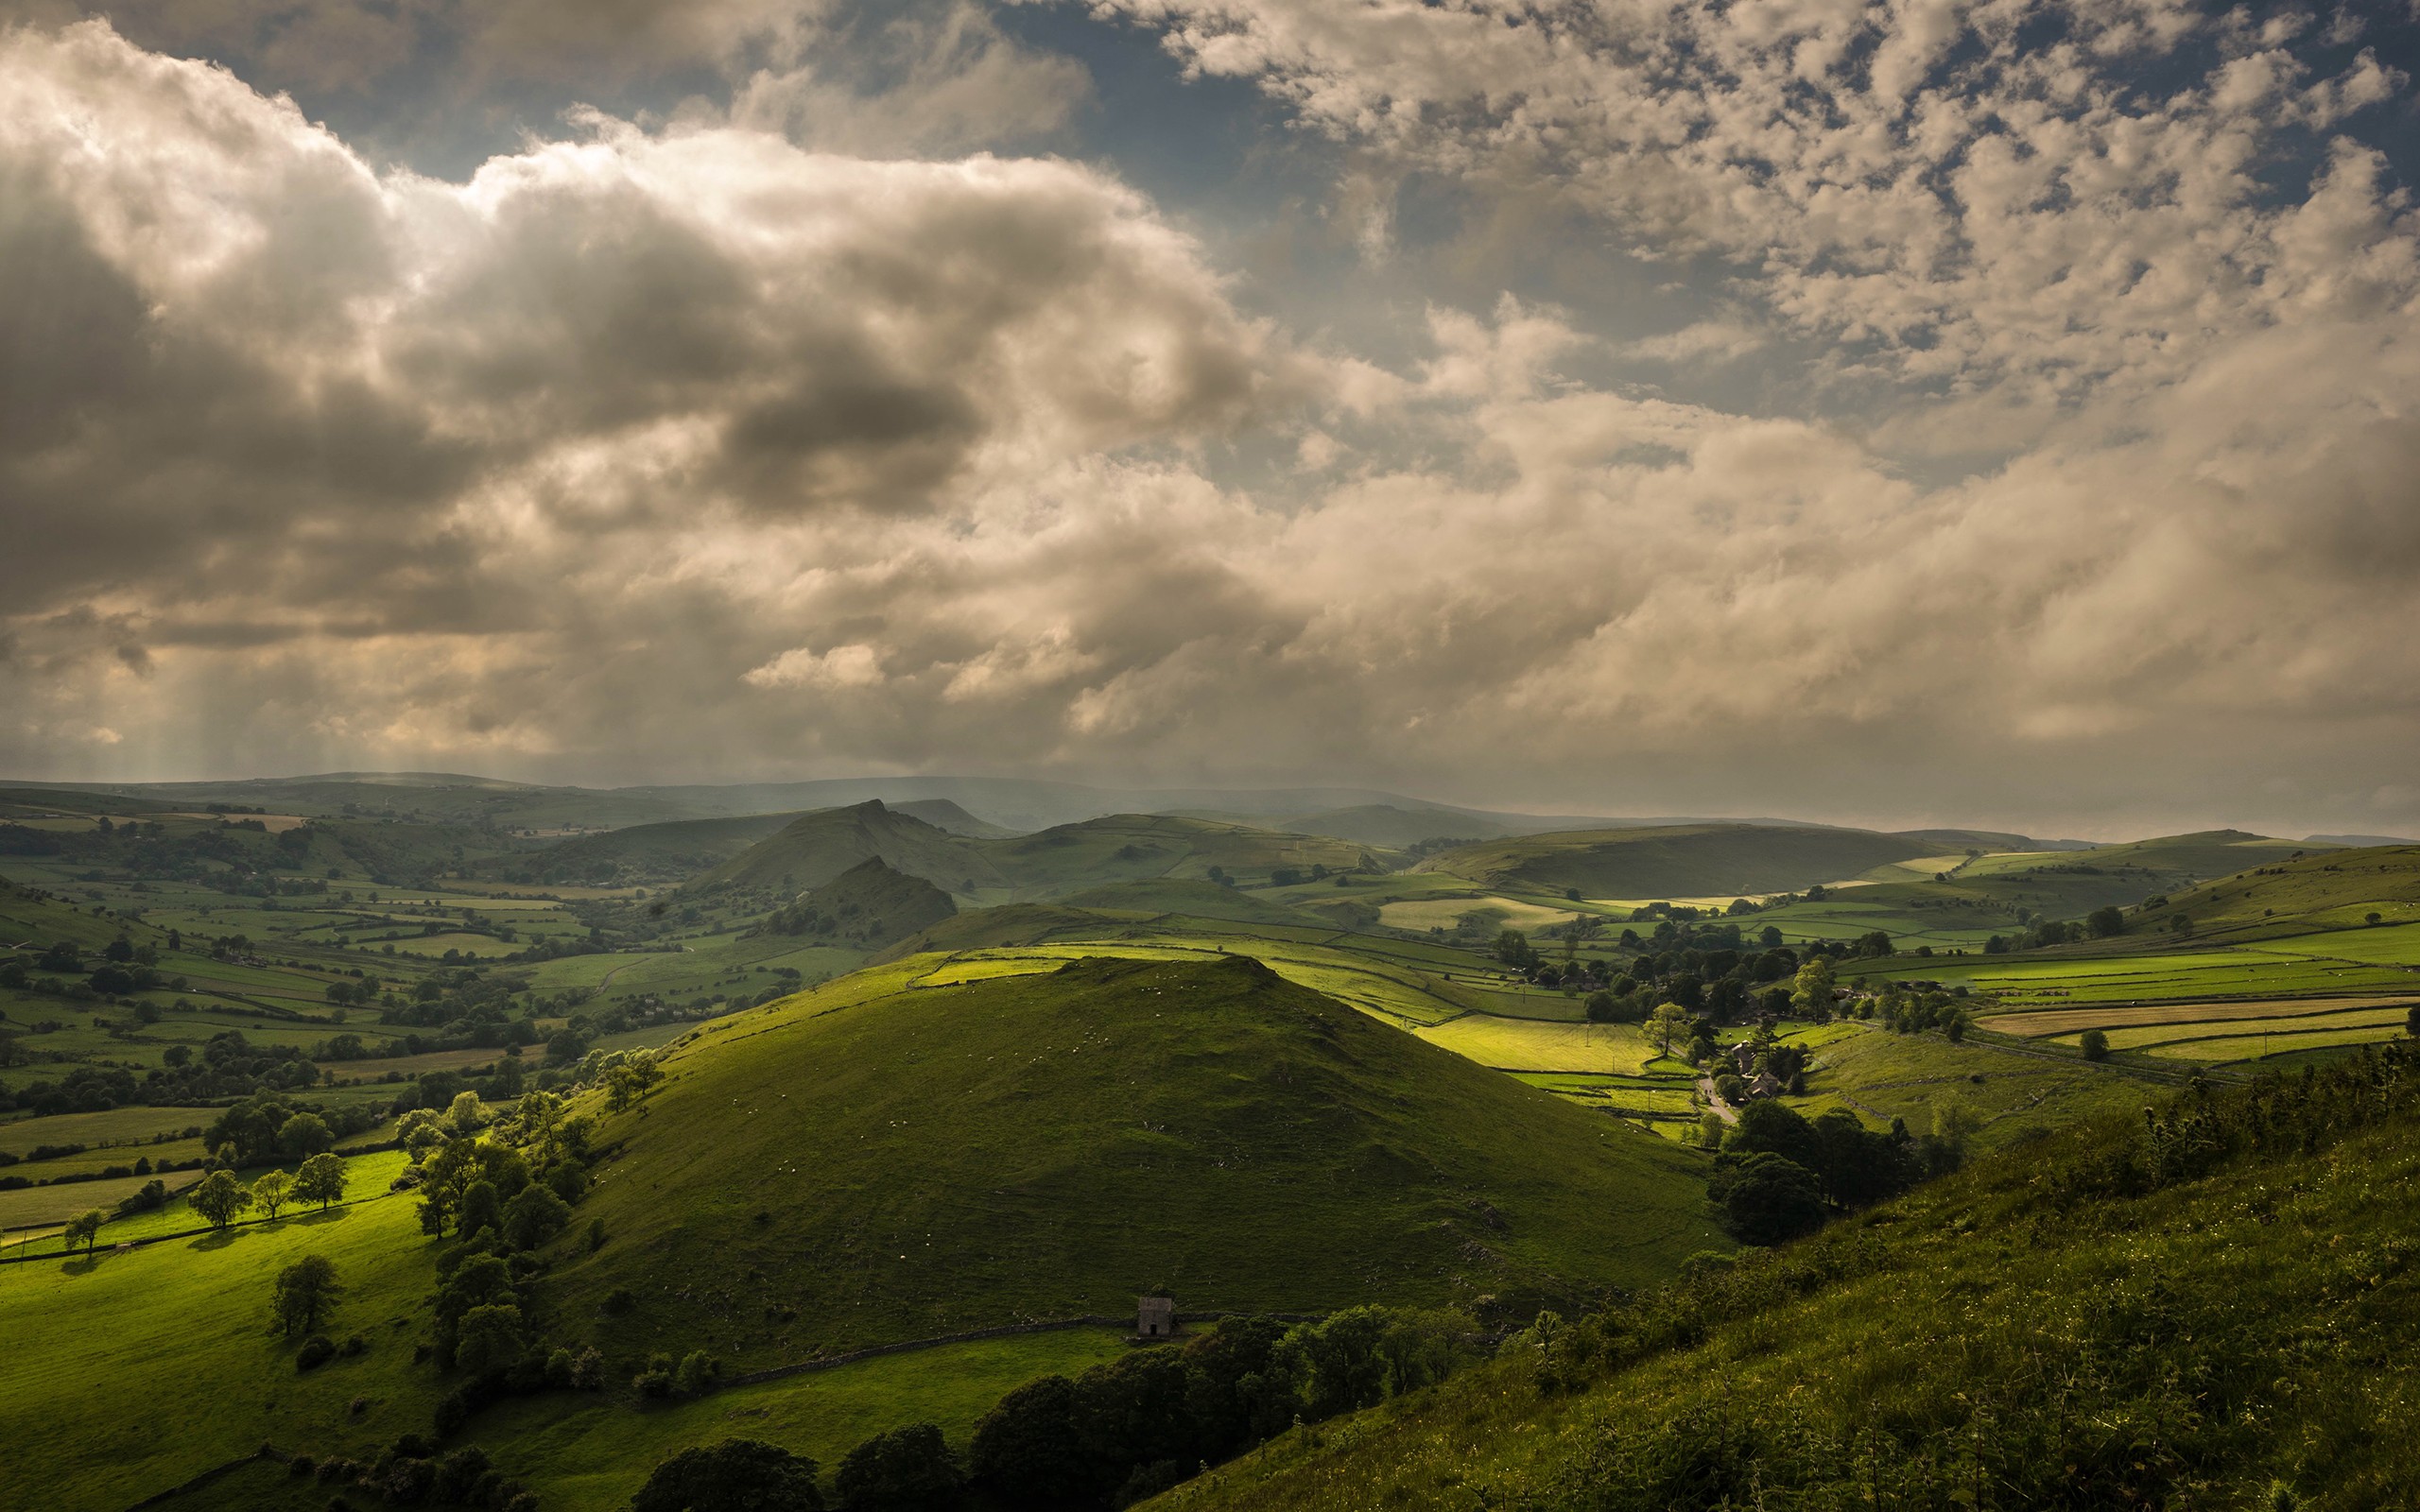 General 2560x1600 landscape nature photography overcast long exposure mountains UK clouds field